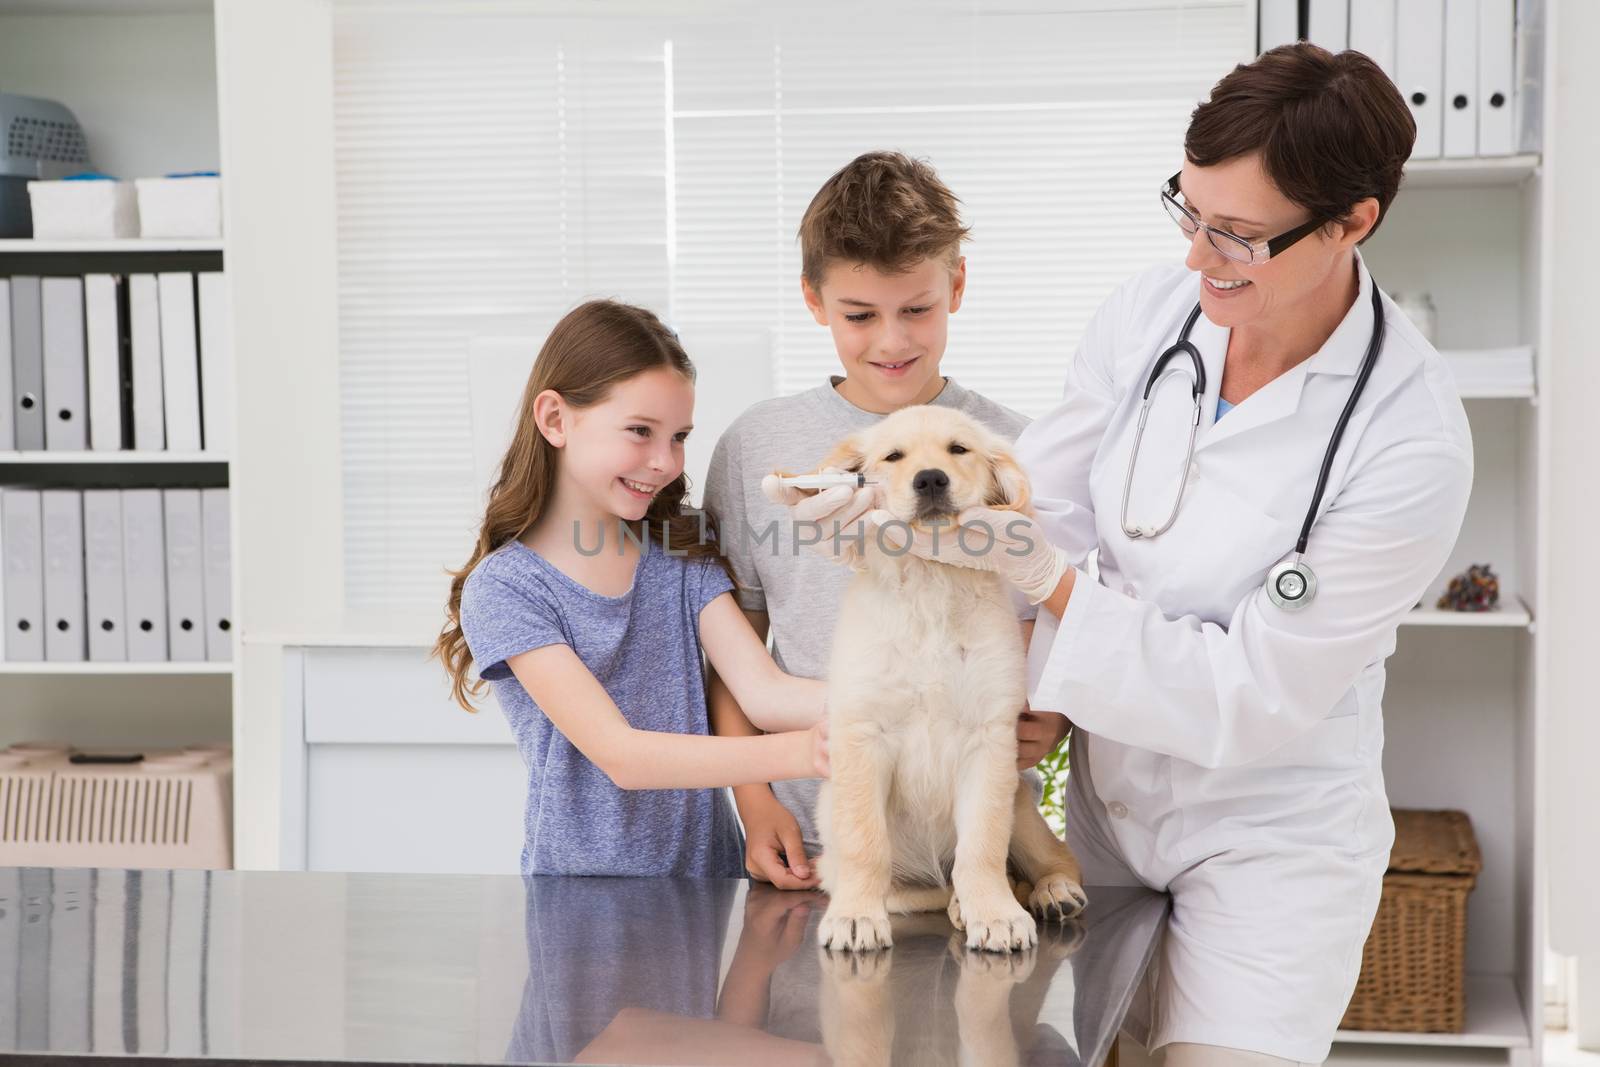 Smiling vet examining a dog with its owners in medical office